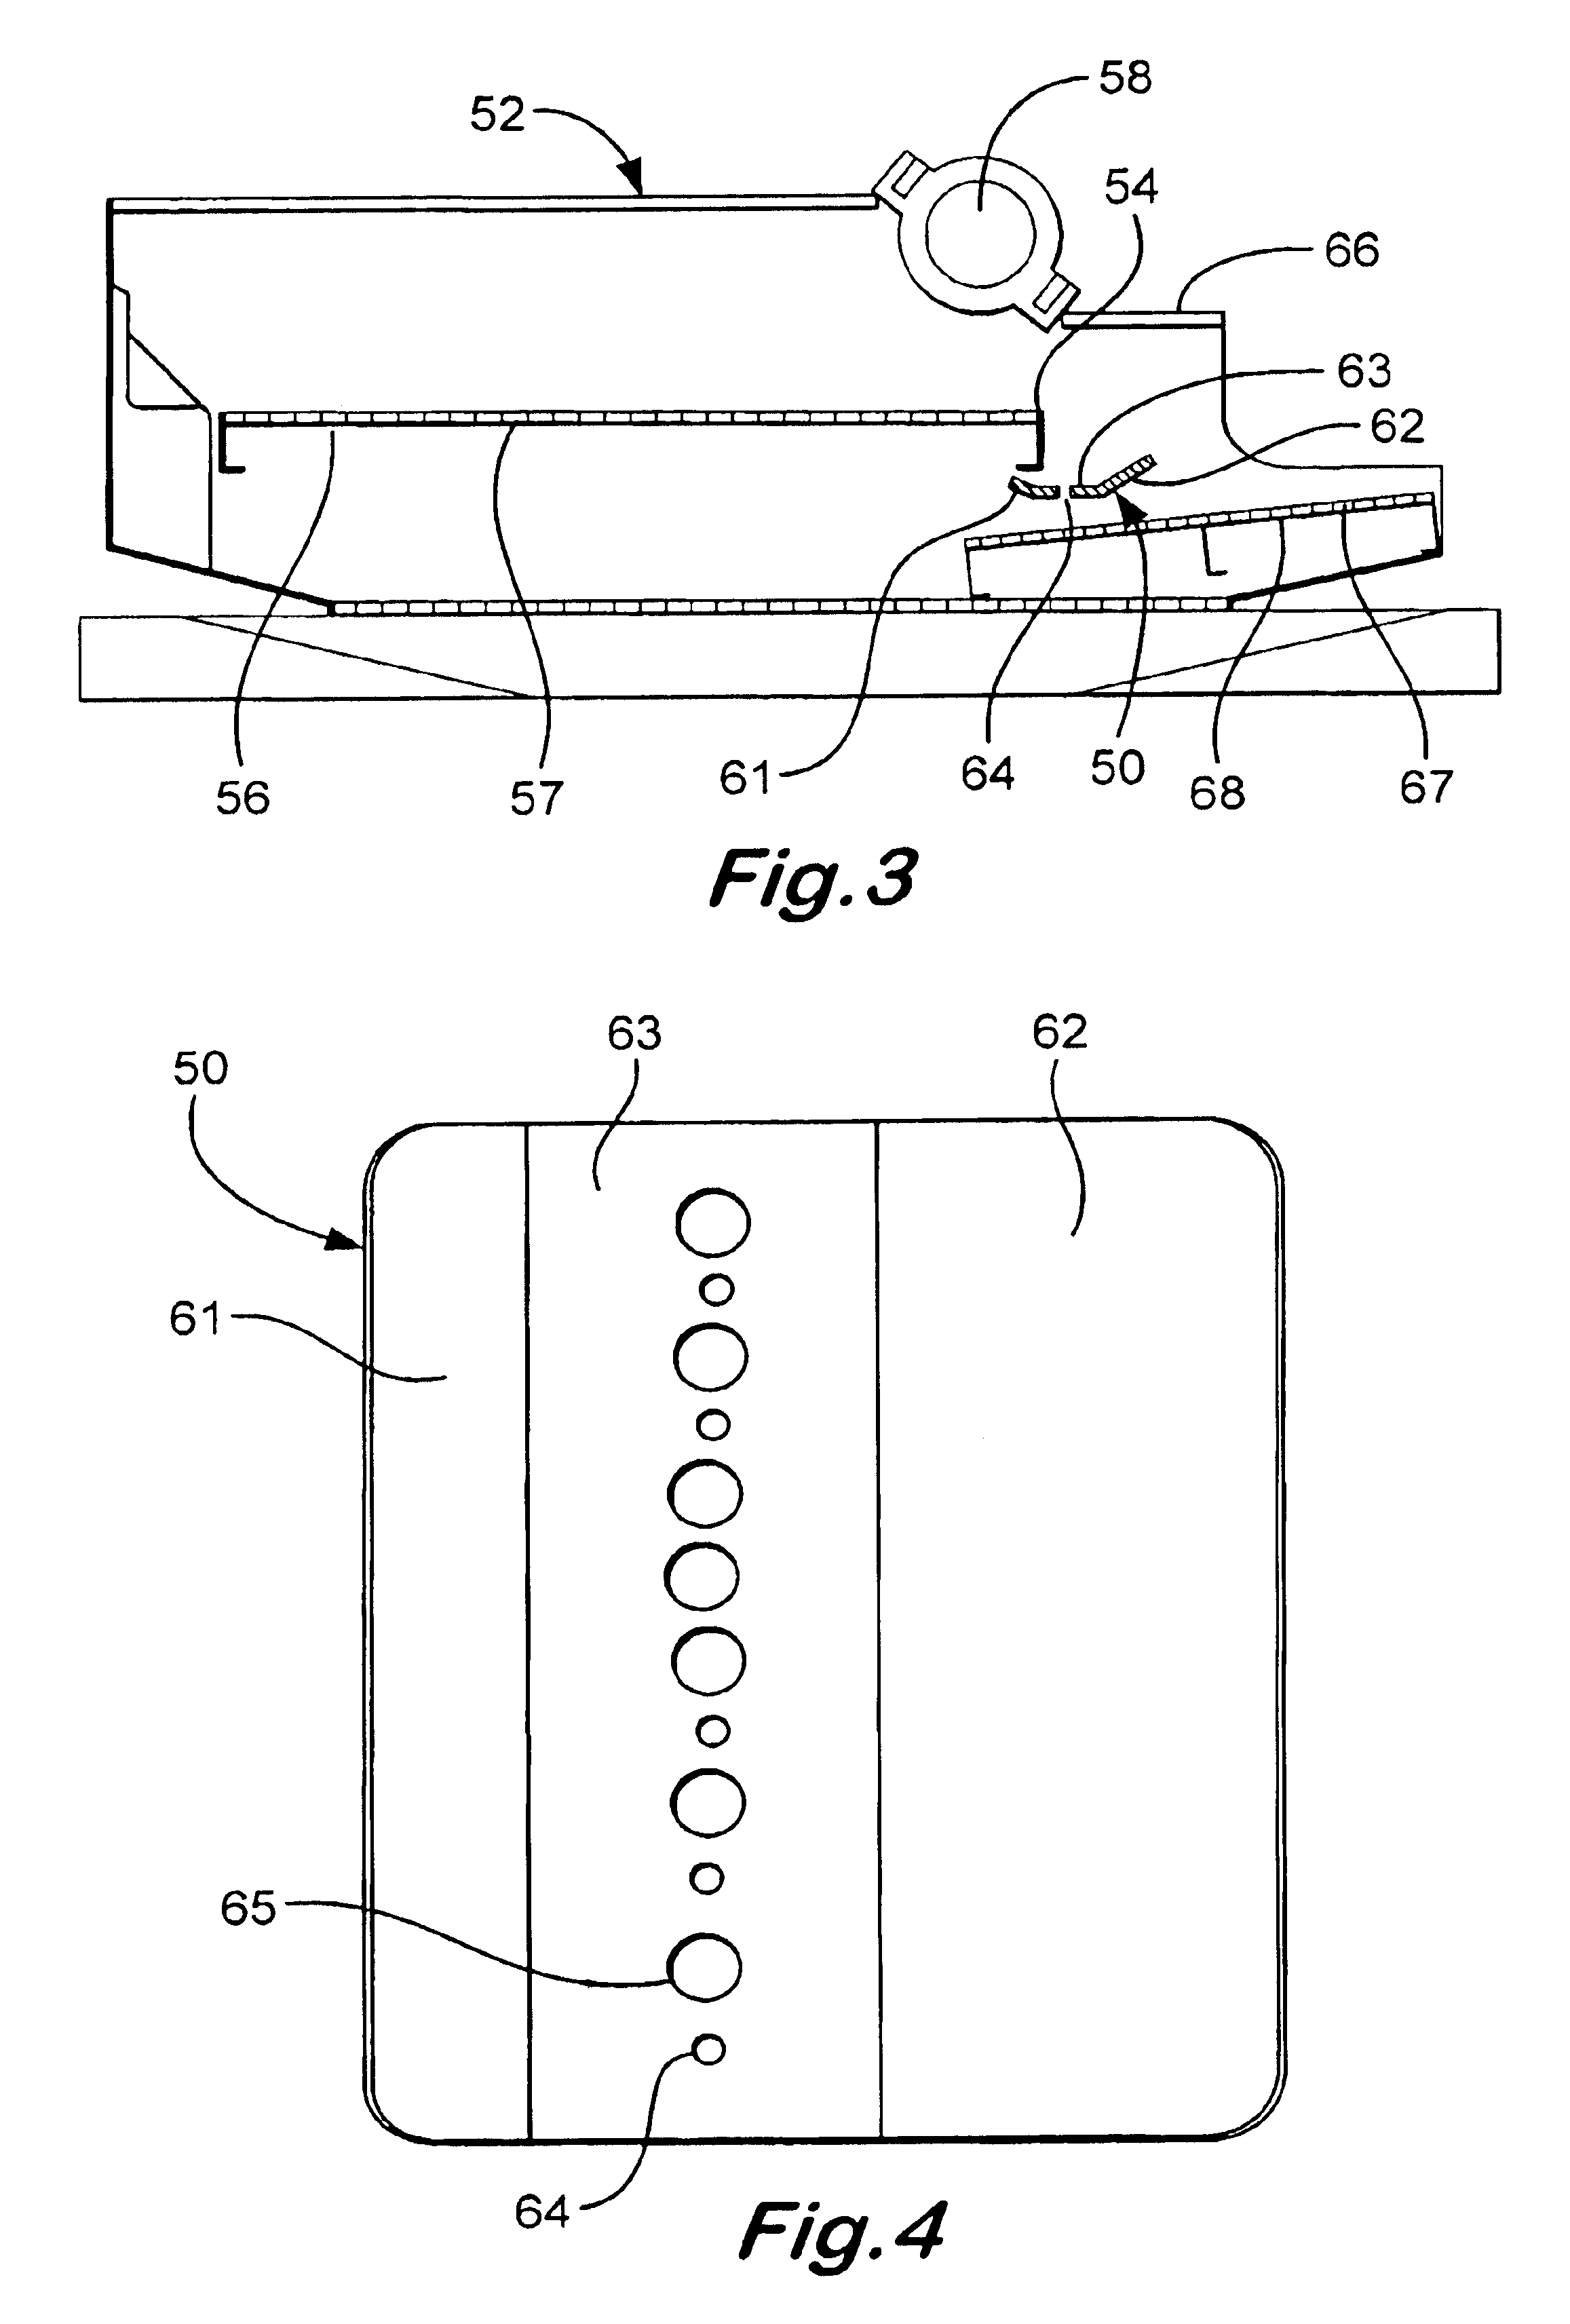 Fluid flow diffusers and vibratory separators